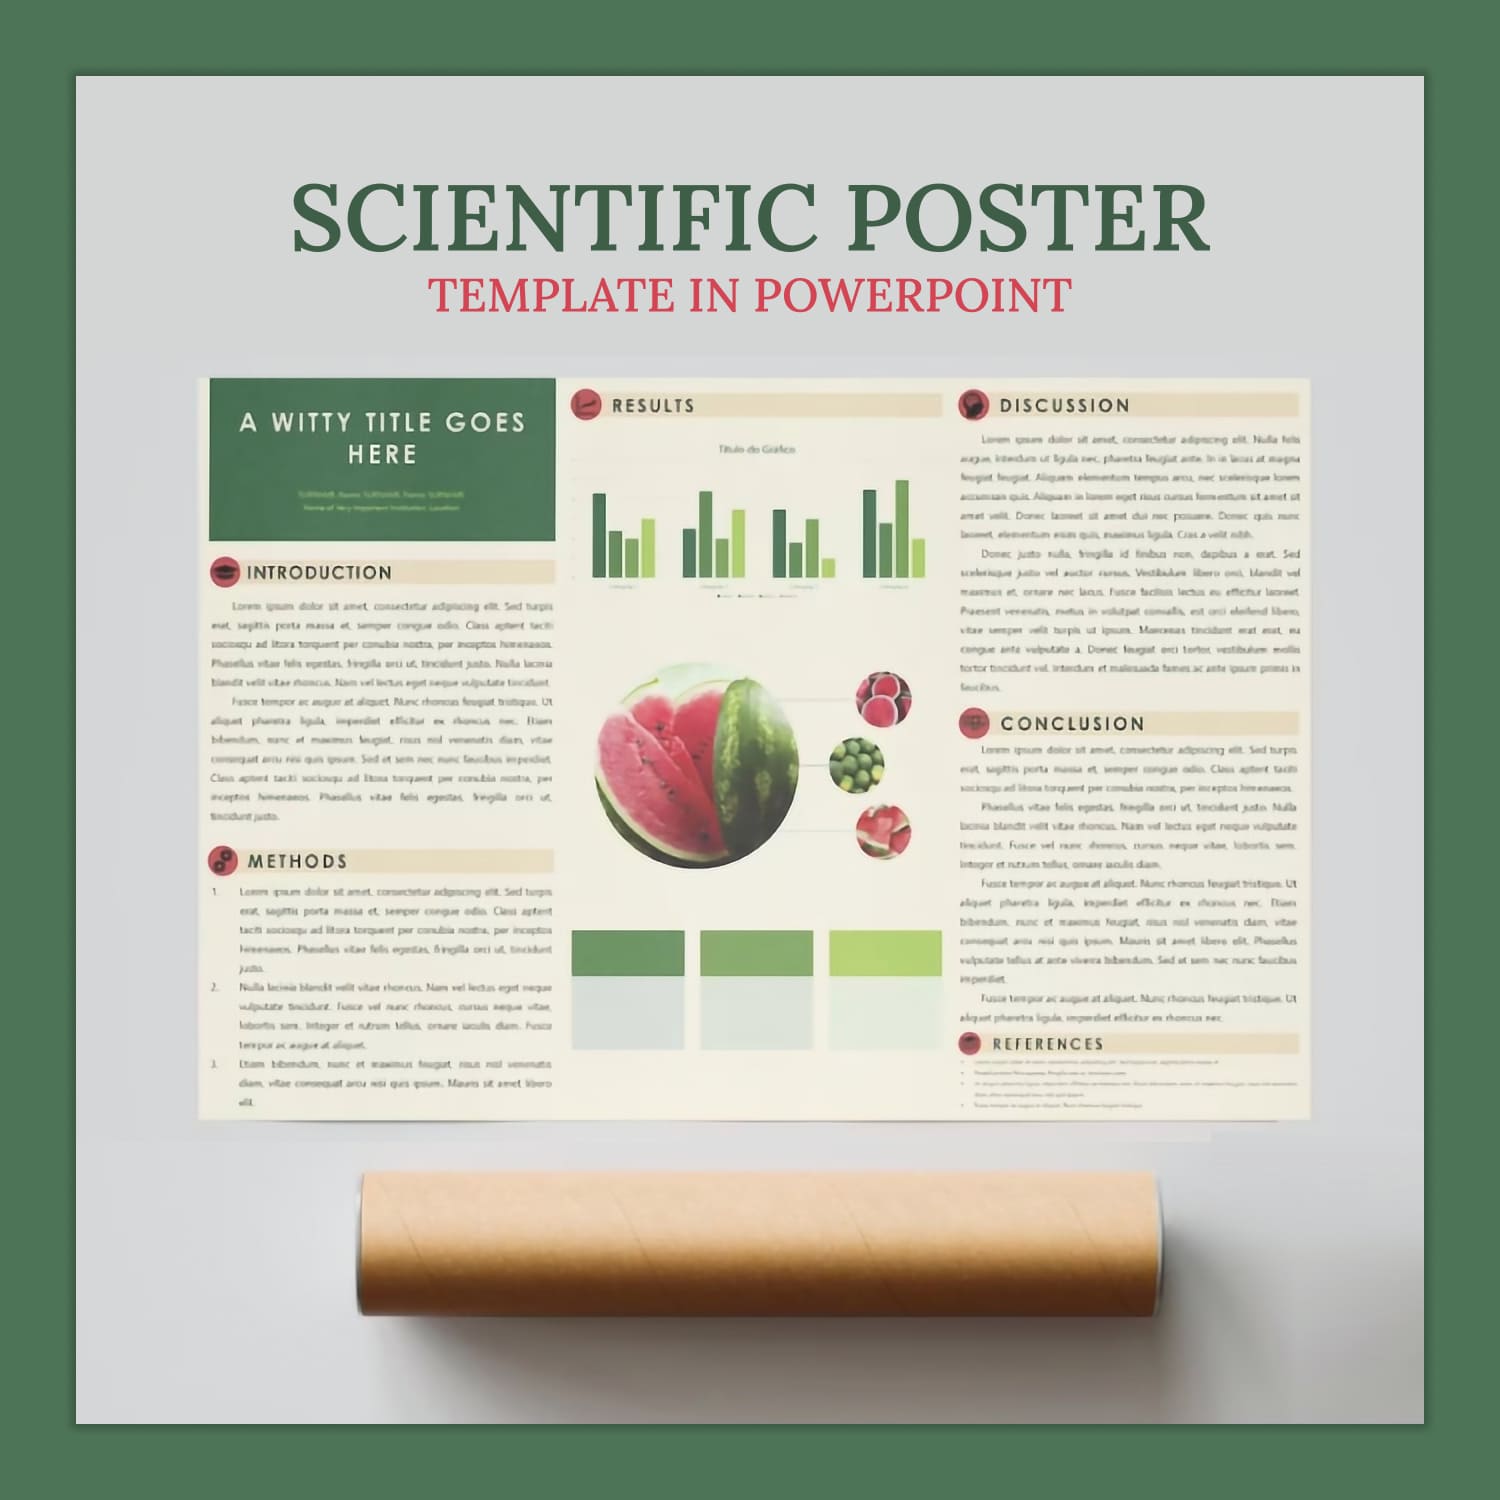 How to Make a Fabric Research Poster with PowerPoint